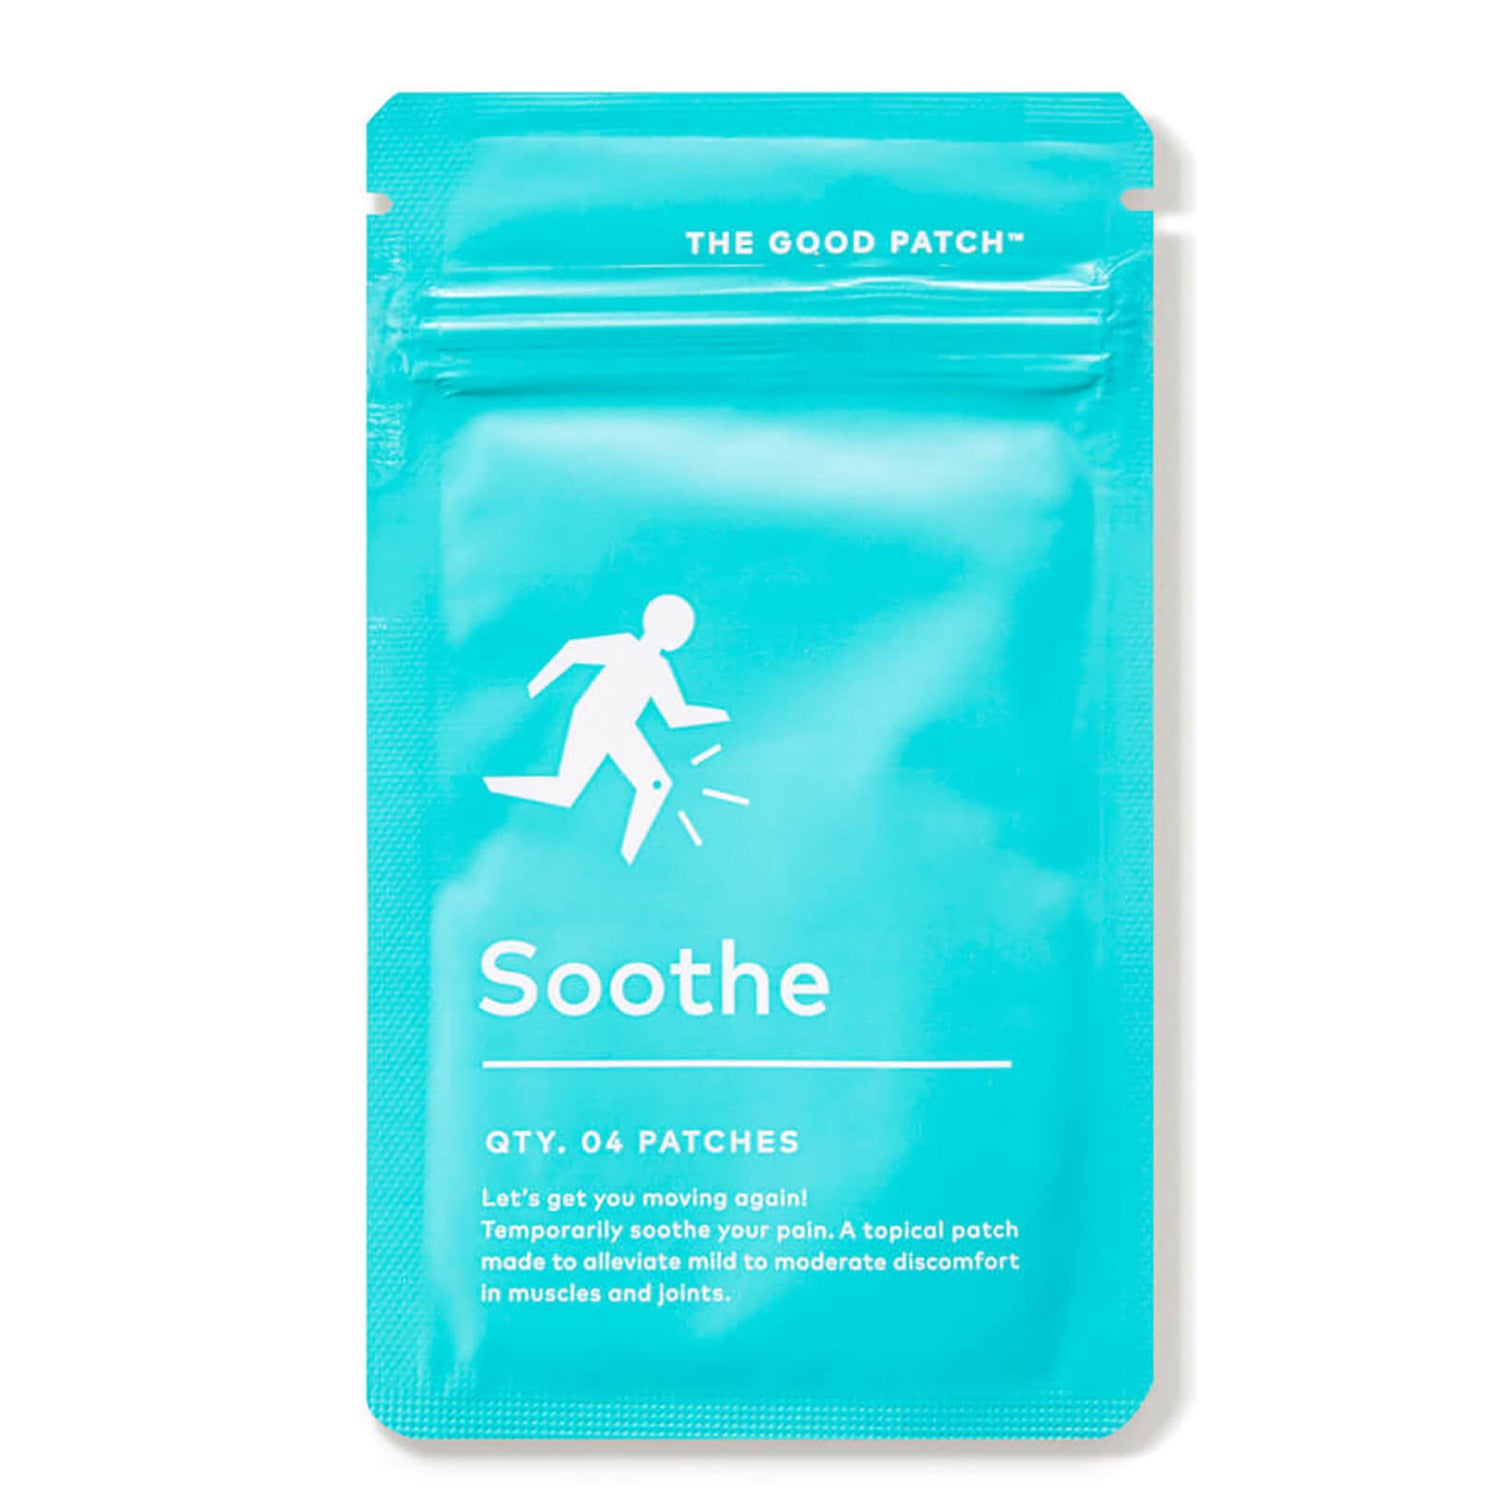 The Good Patch Plant-Based Soothe (4 piece)